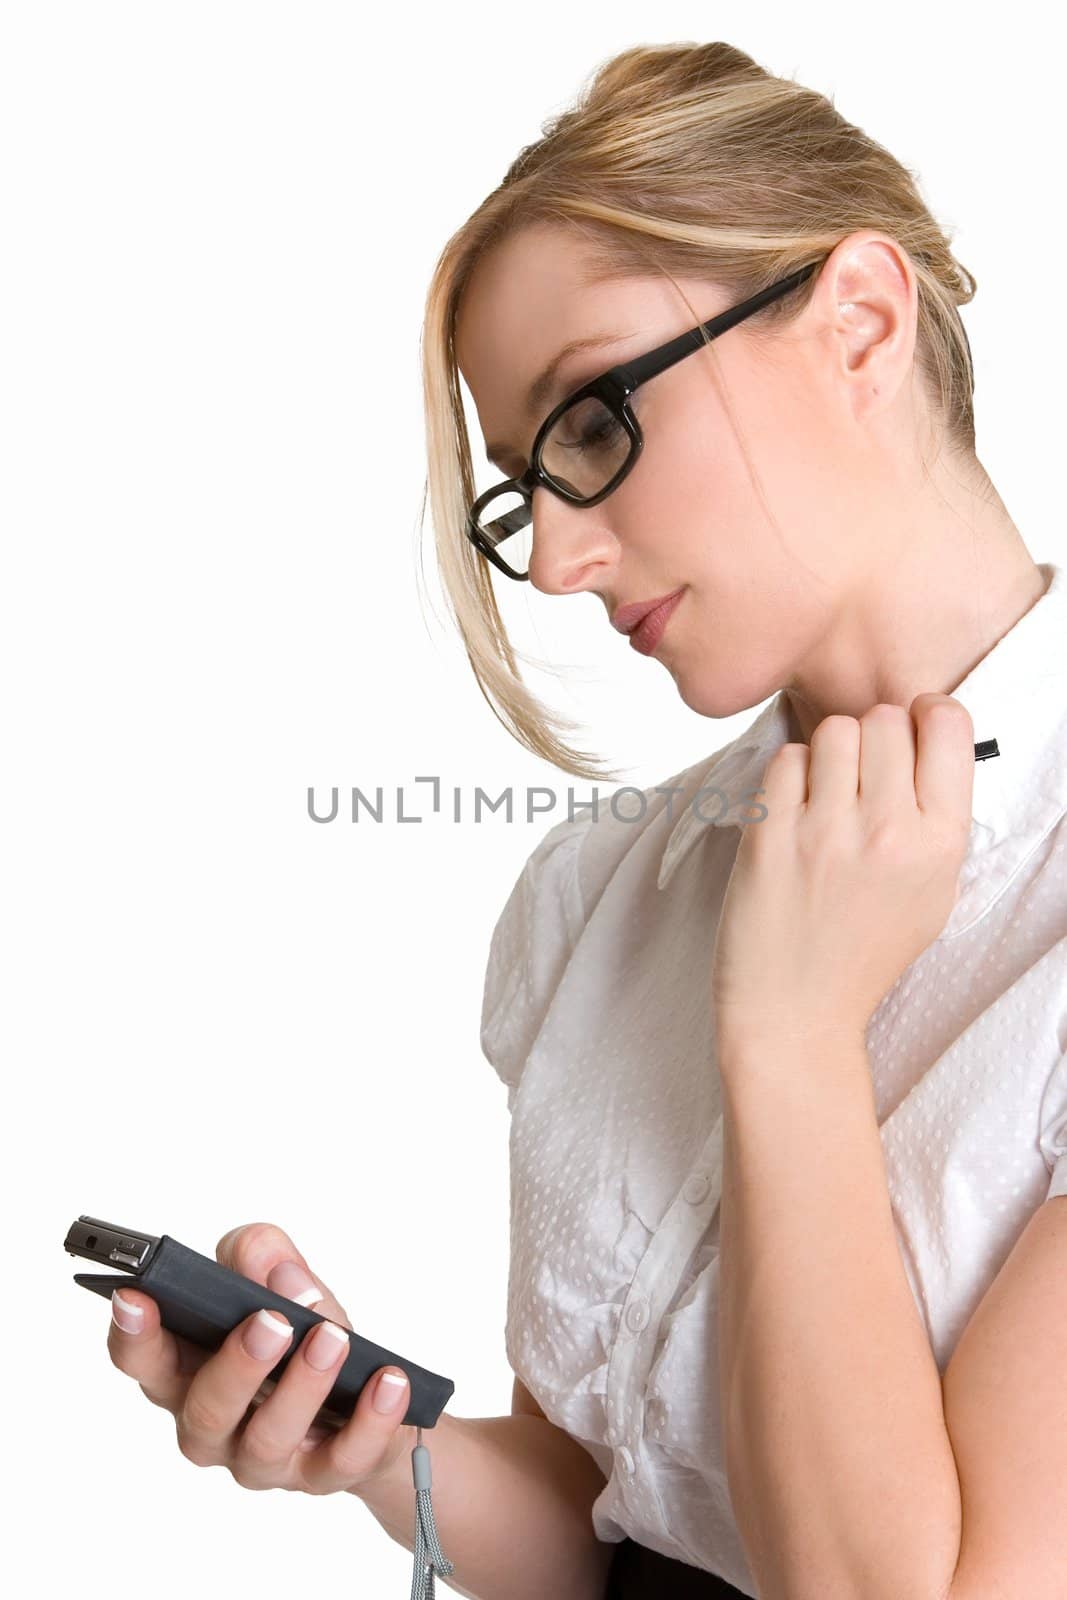 Business woman using a pda loaded with application software